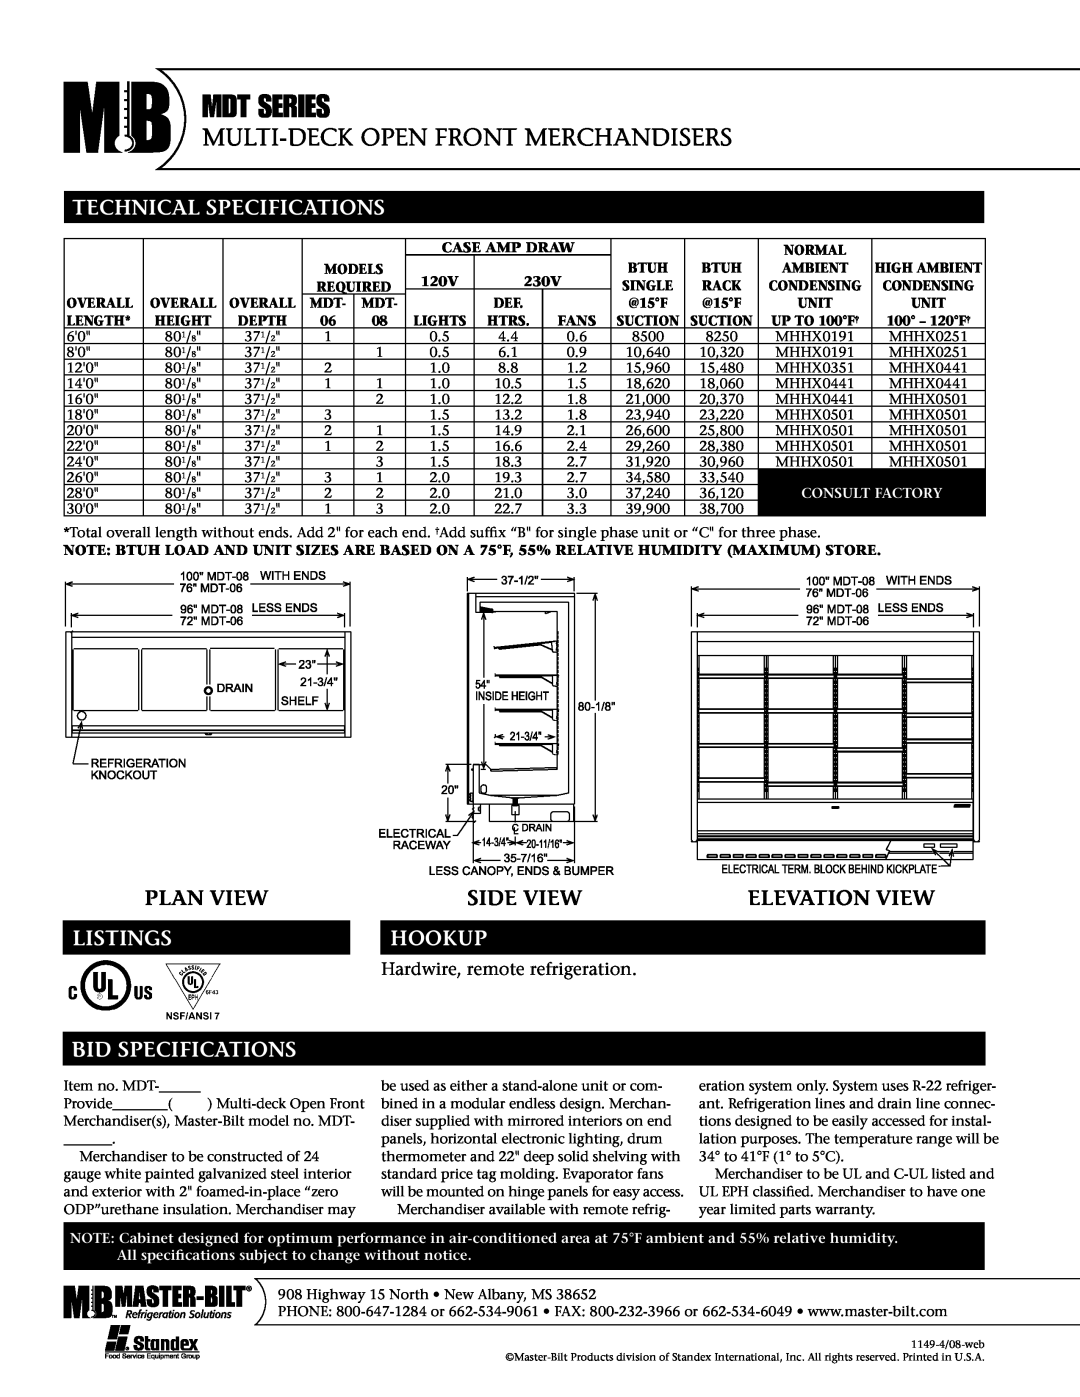 Master Bilt MTD-08 Technical Specifications, Plan View, Listings, Side View, Elevation View, Hookup, Bid Specifications 